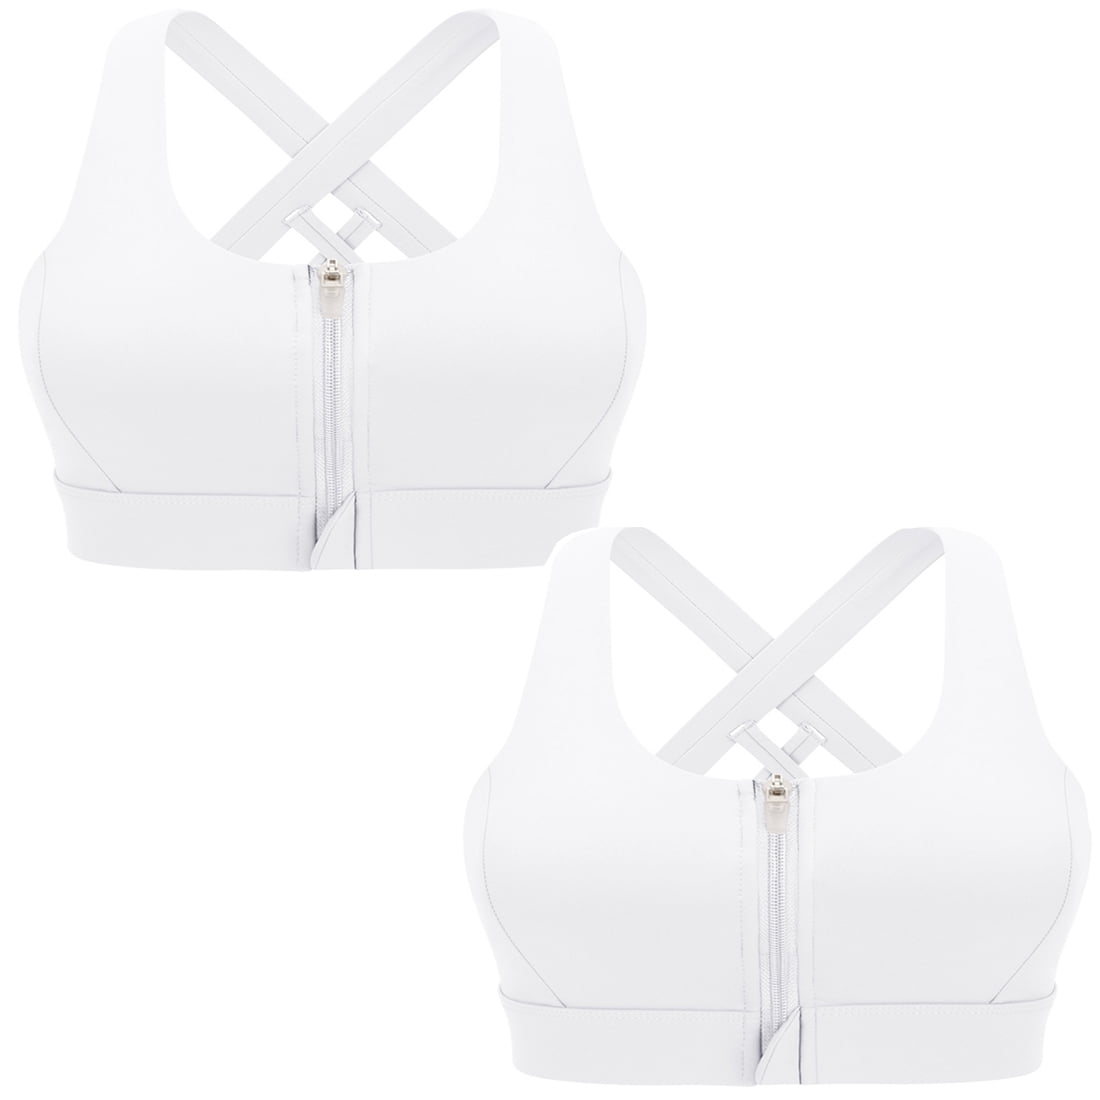 Xmarks Front Closure Bras for Women Wirefree - Ultra-Soft and Breathable  Smoothing Push up Soft Tank Top Bra